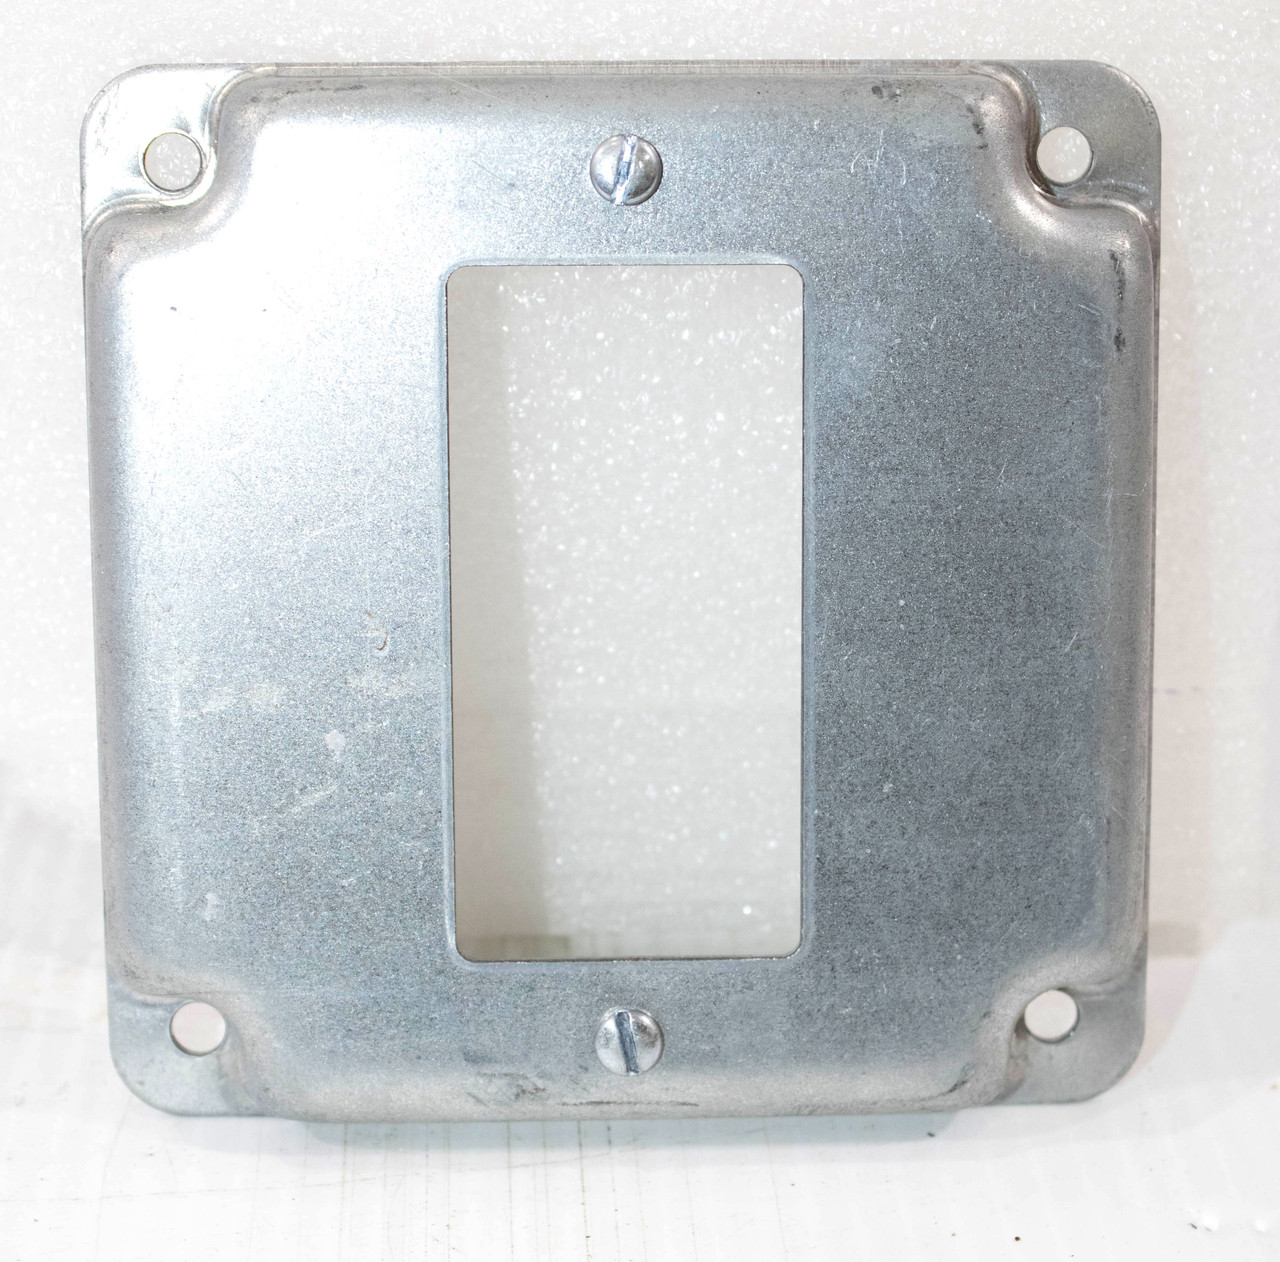 Steel City RS-16-CC Electrical Outlet Surface Cover Plate 4"L x 4"W x 1/2"D